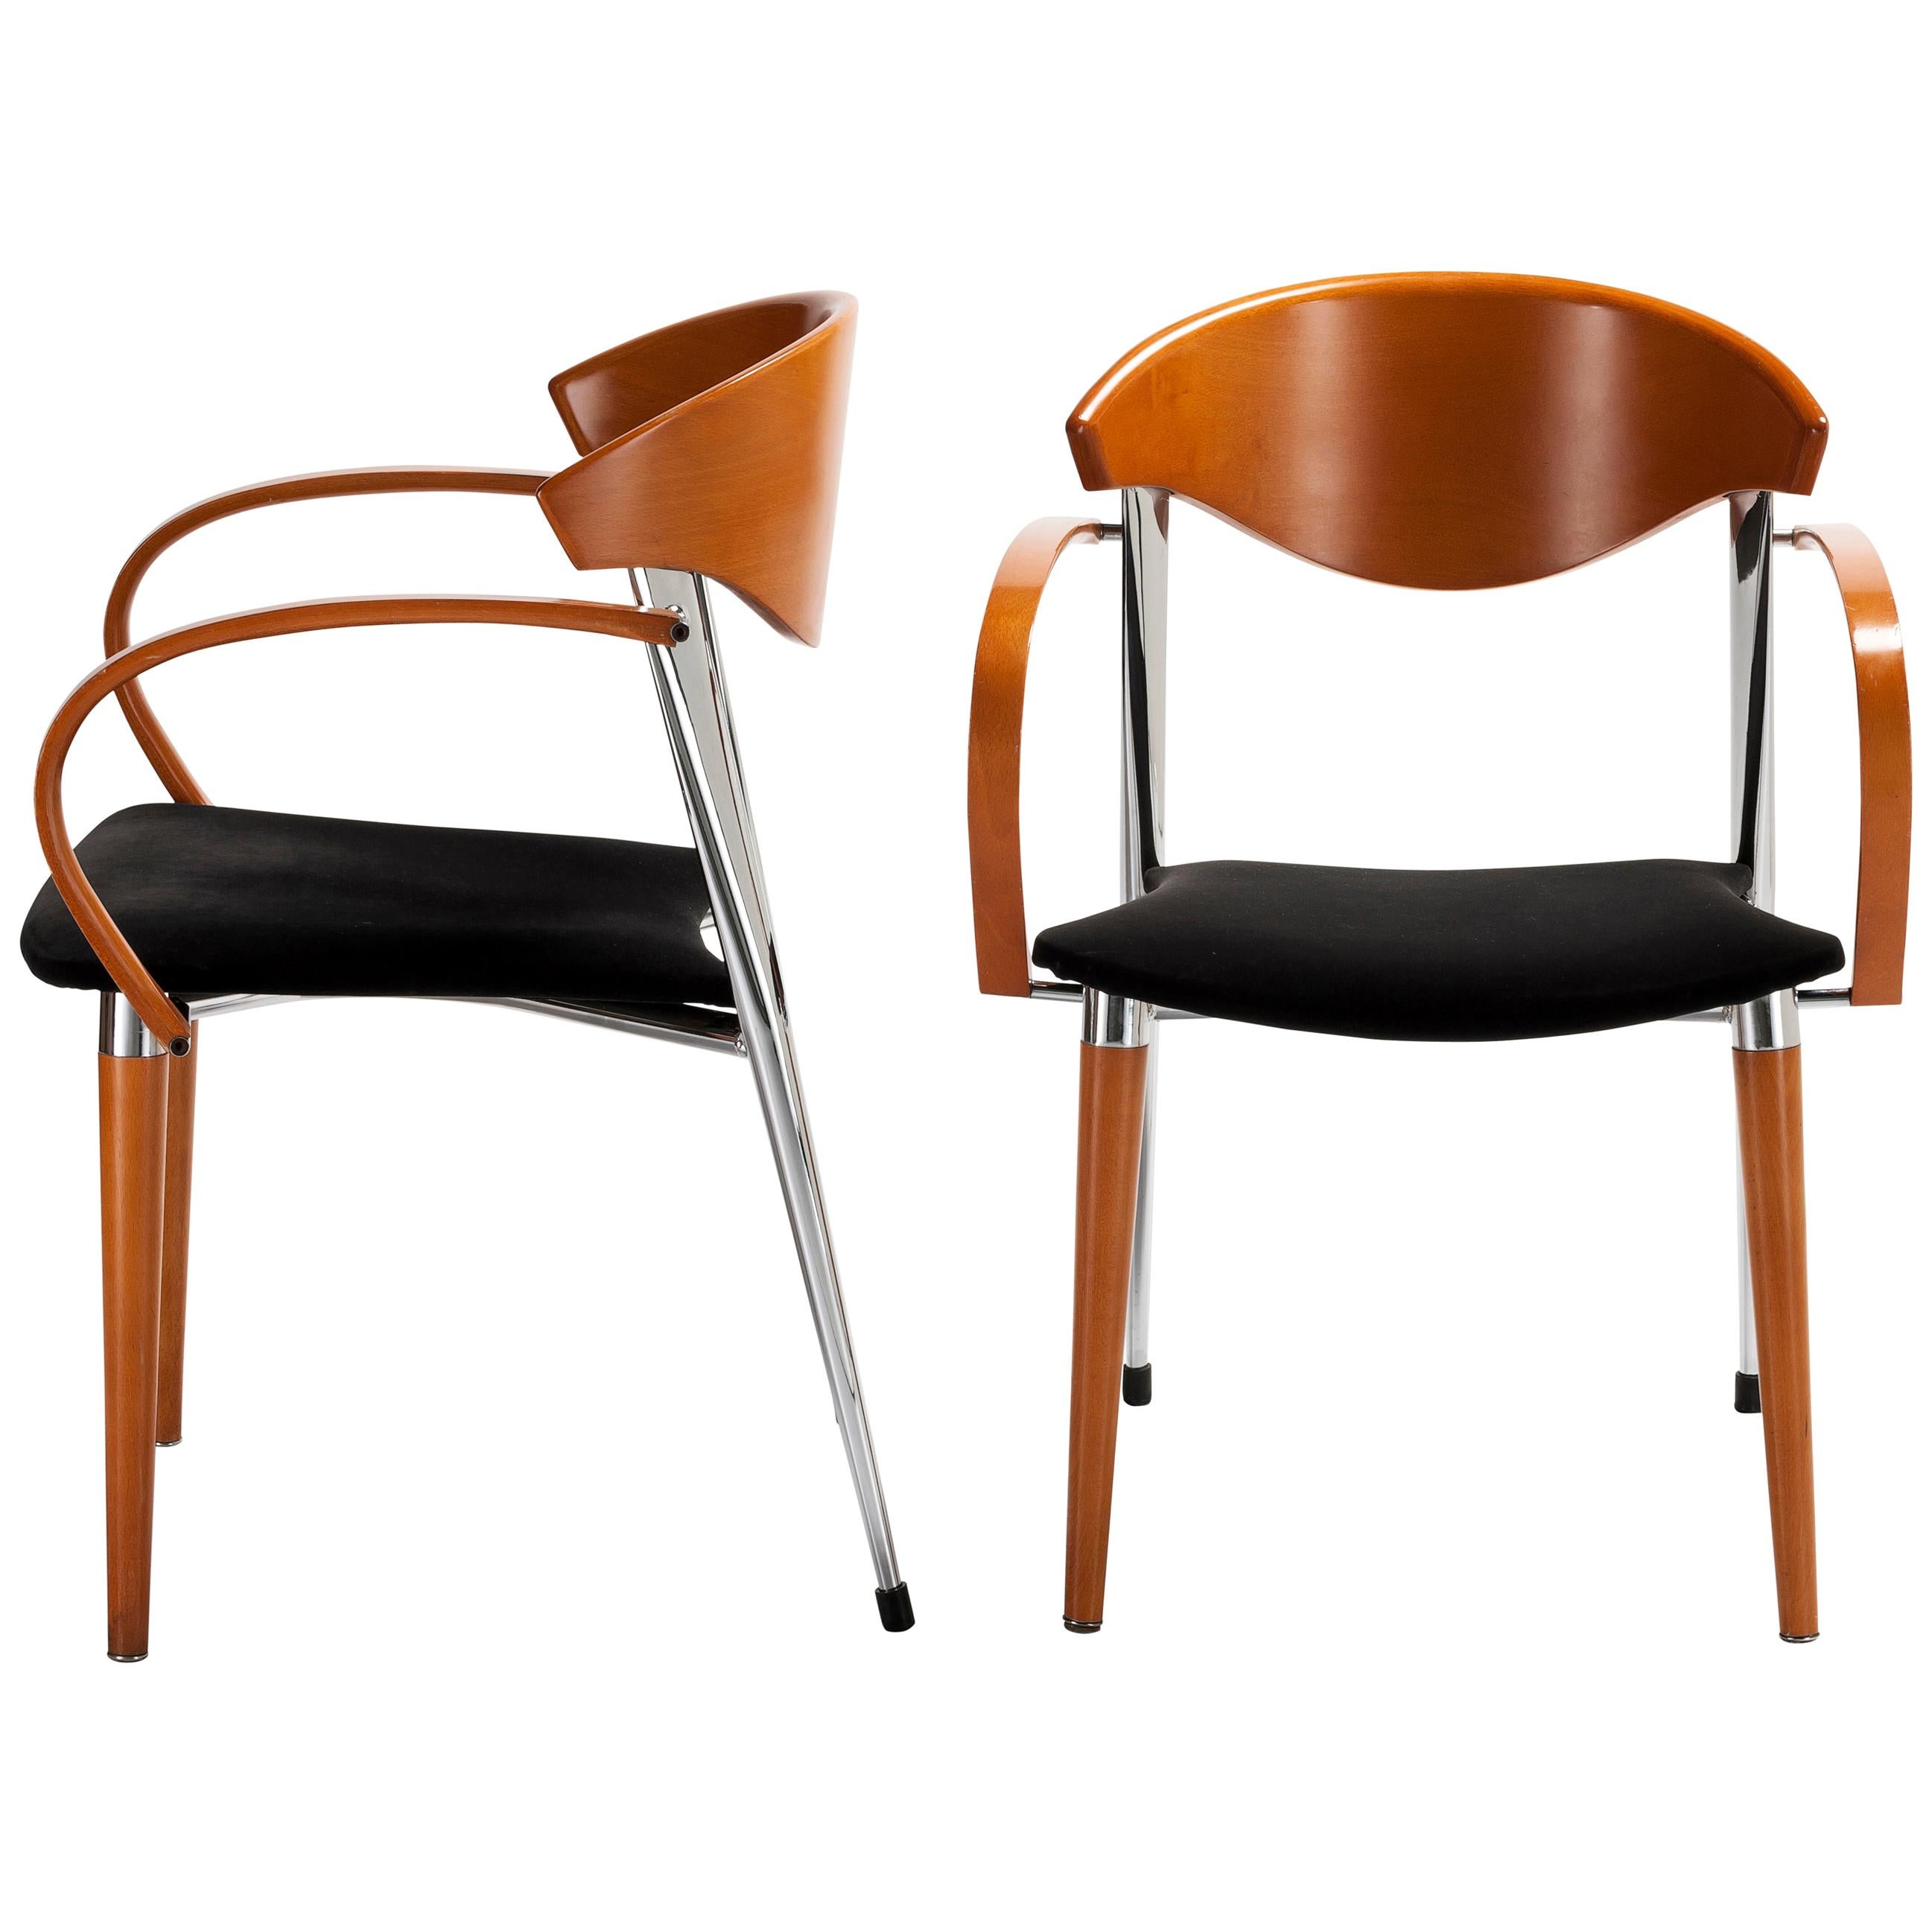 Paco Capdell, Pair of Side Chairs in Beech and Chrome, Late 1970s Design For Sale